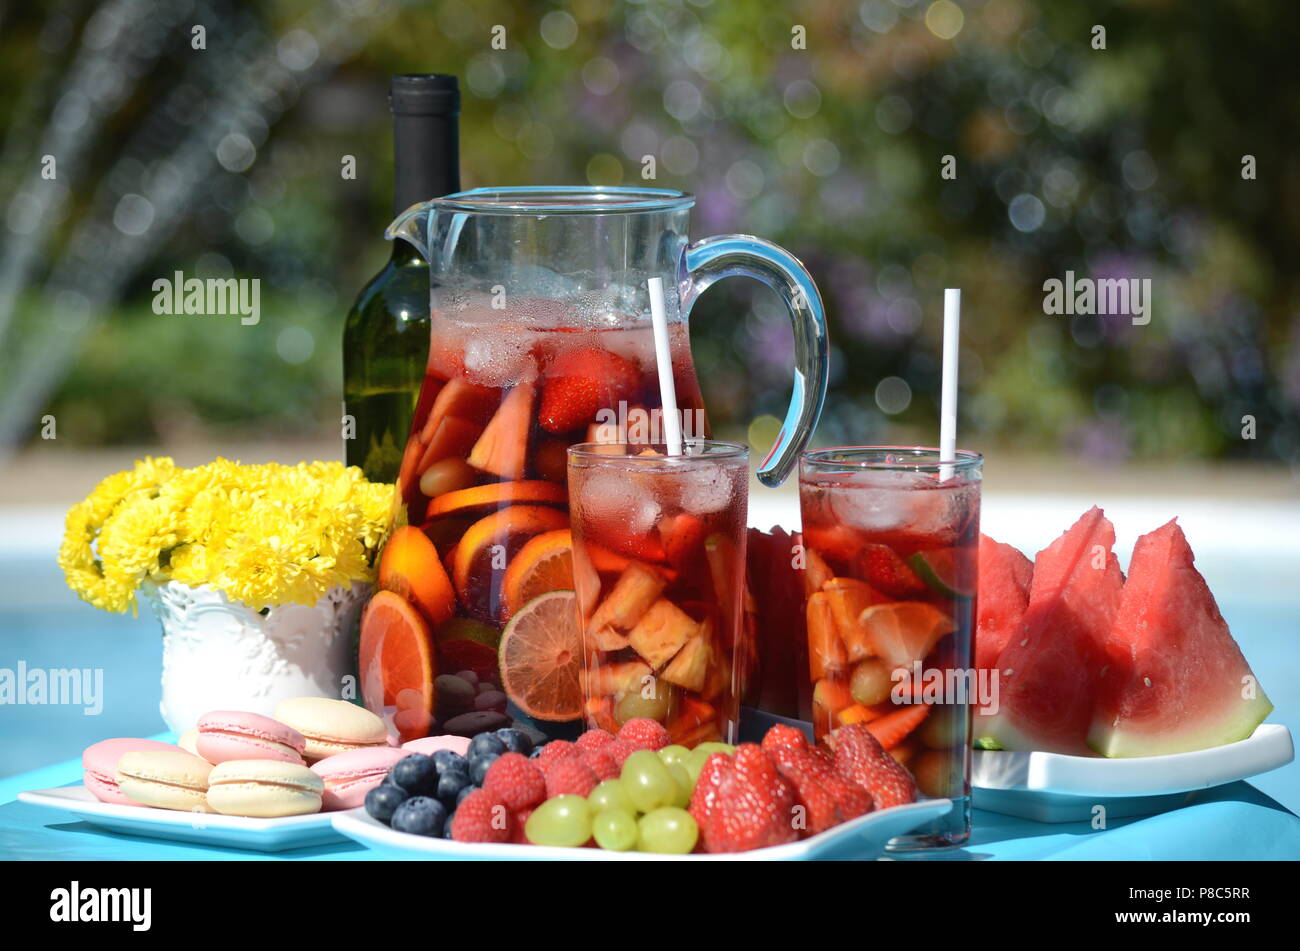 https://c8.alamy.com/comp/P8C5RR/pool-party-with-sangria-pitcher-fruit-cocktails-and-refreshments-by-the-swimming-pool-summer-lifestyle-topical-vacation-fun-and-relaxation-theme-P8C5RR.jpg